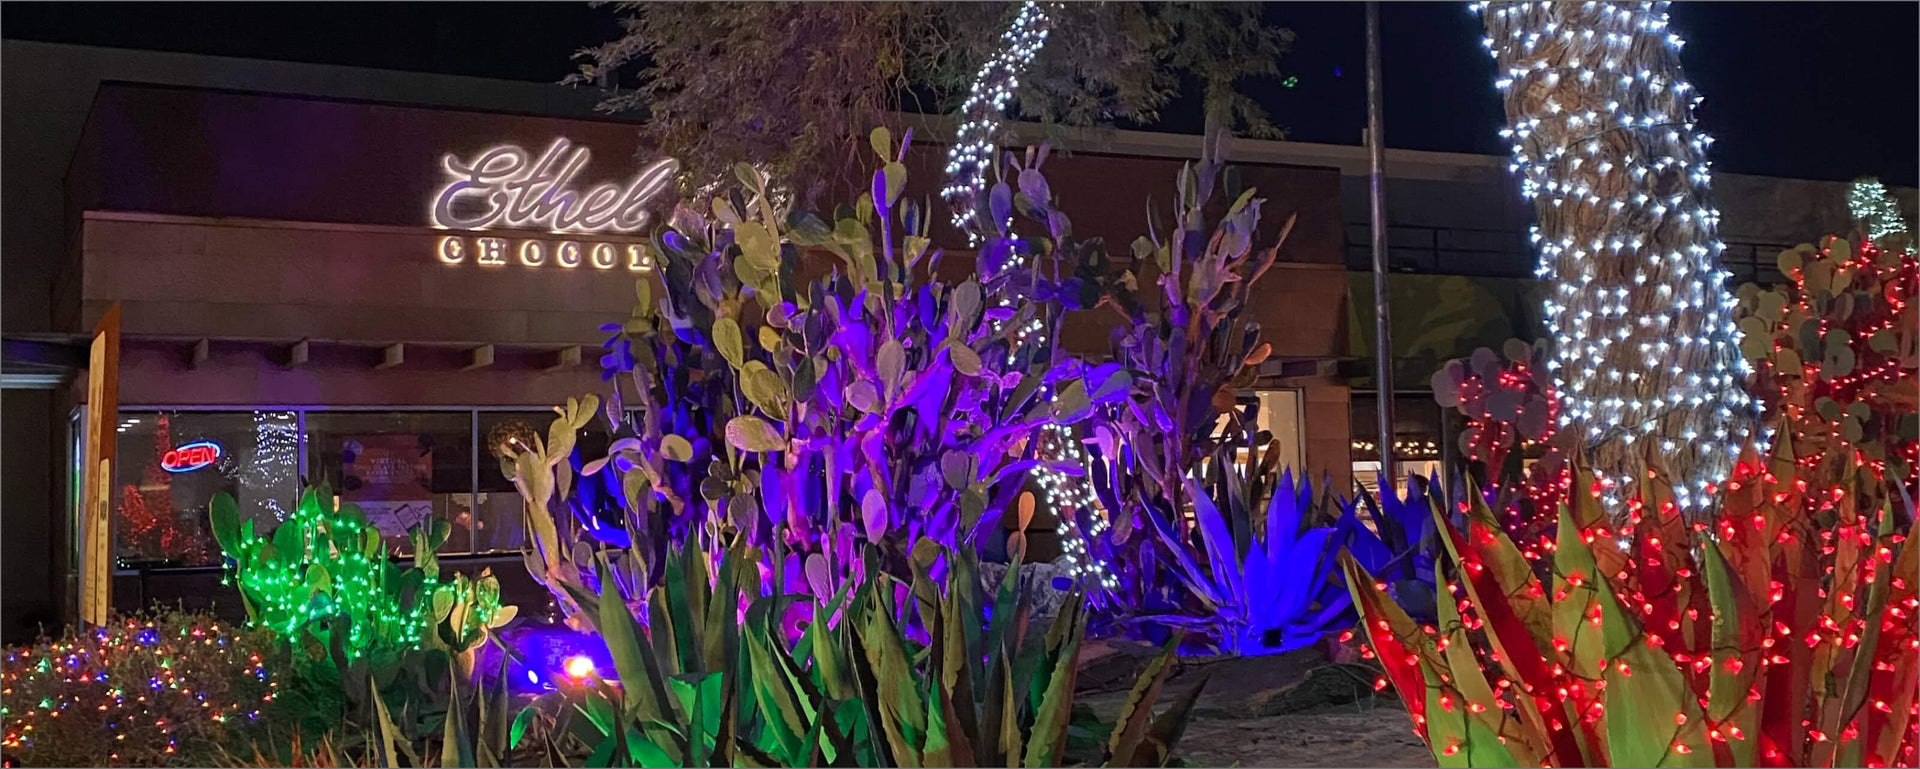 30th Annual Holiday Cactus Garden Lights